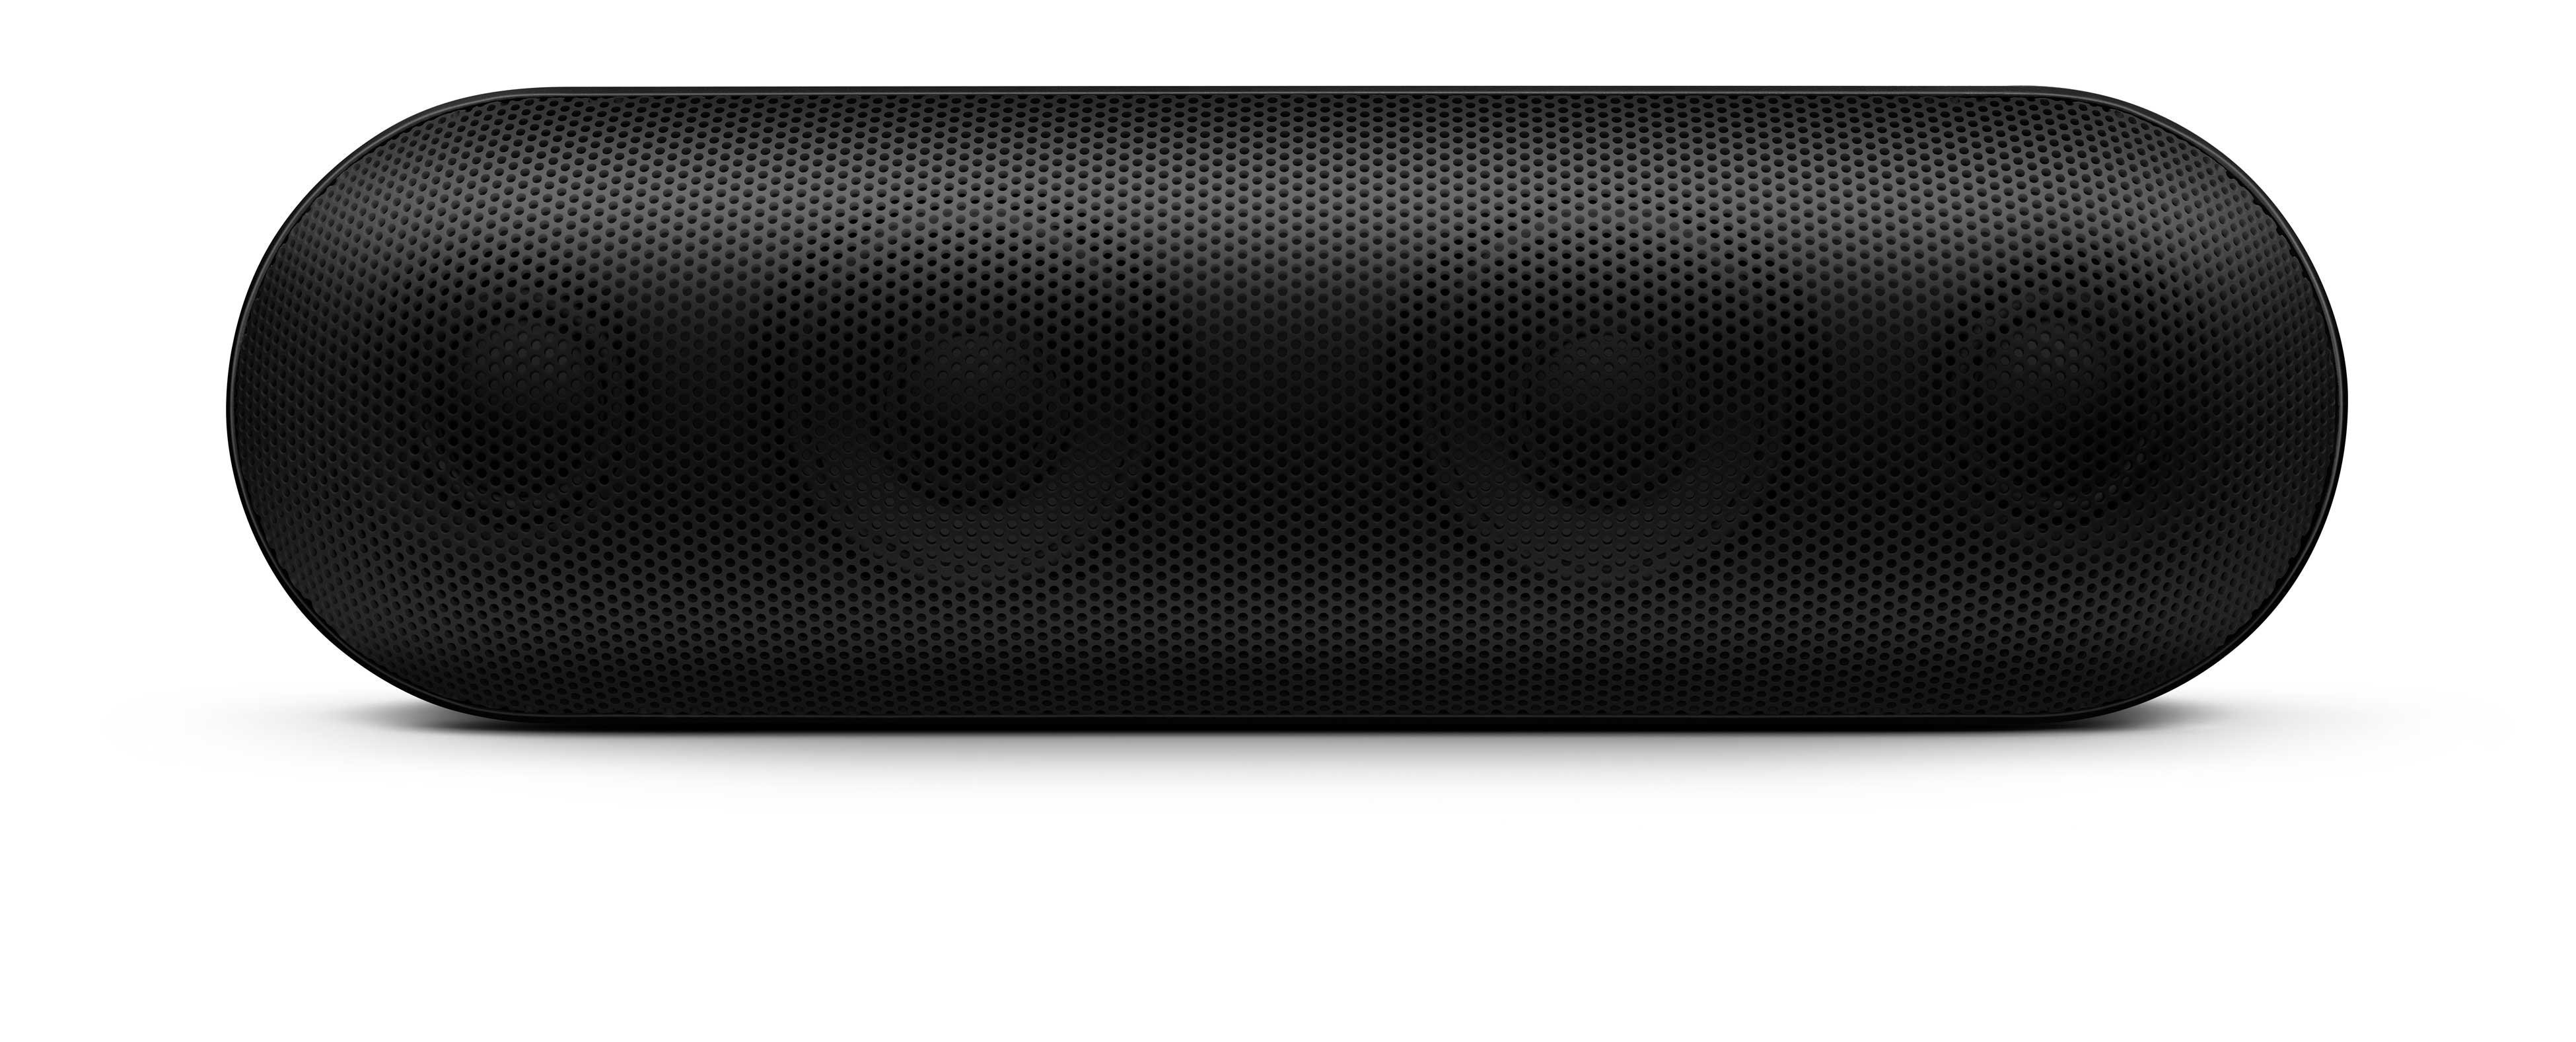 Beats by Dr. Dre Pill+ Portable Bluetooth Speaker, Black, ML4M2LL/A - image 3 of 10